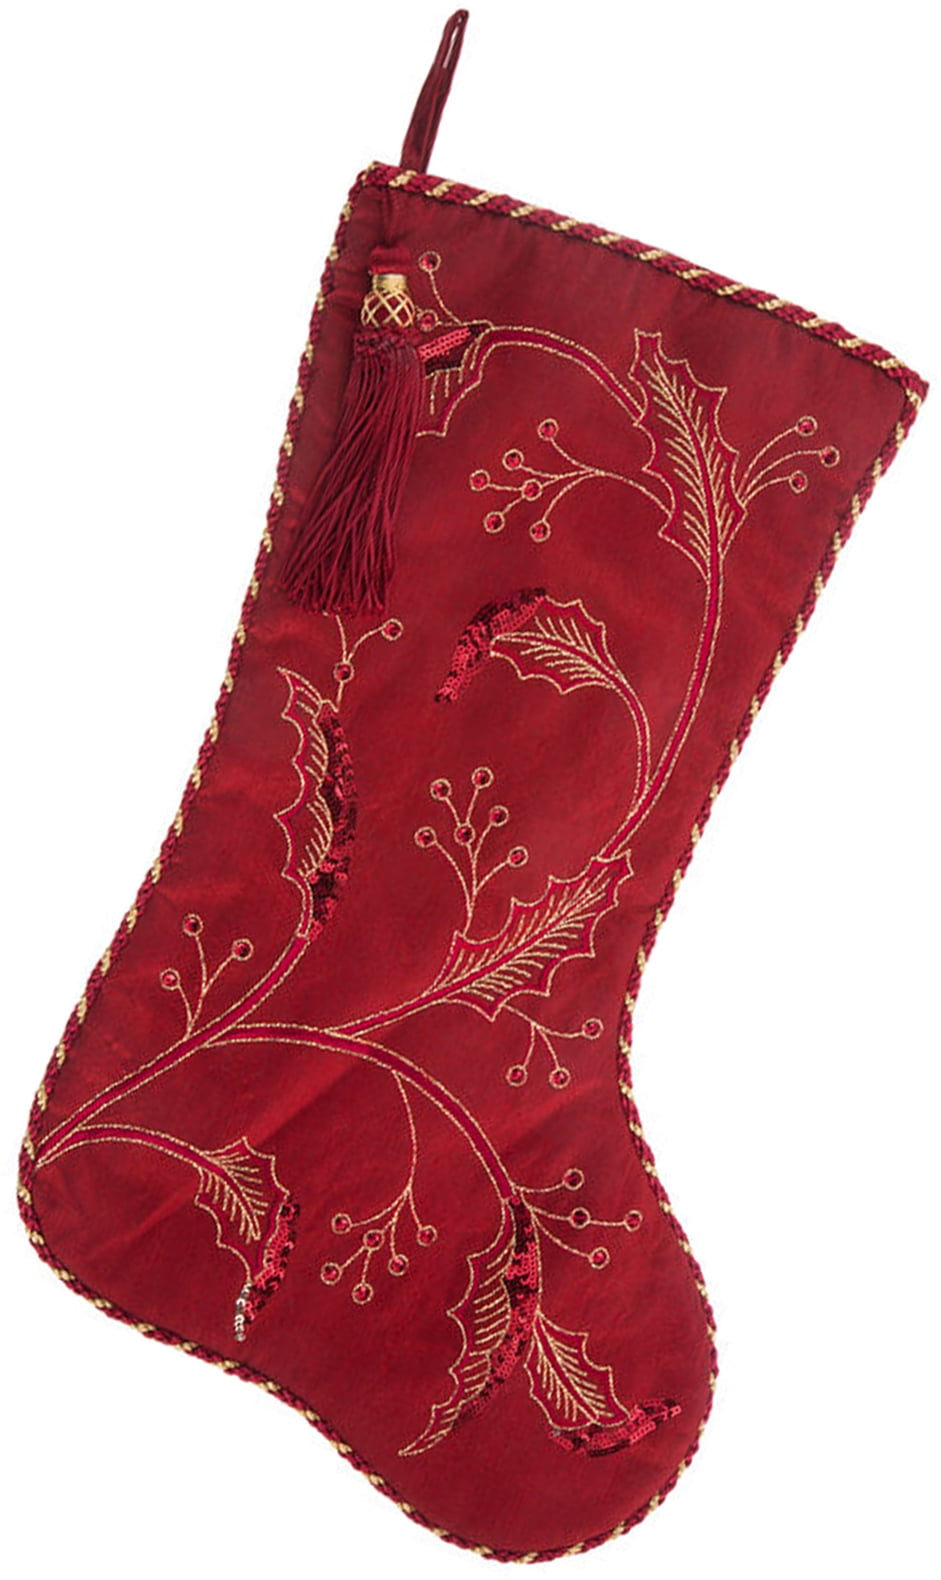 20" Long by Midwest CBK Christmas FLANNEL SHIRT STOCKING 